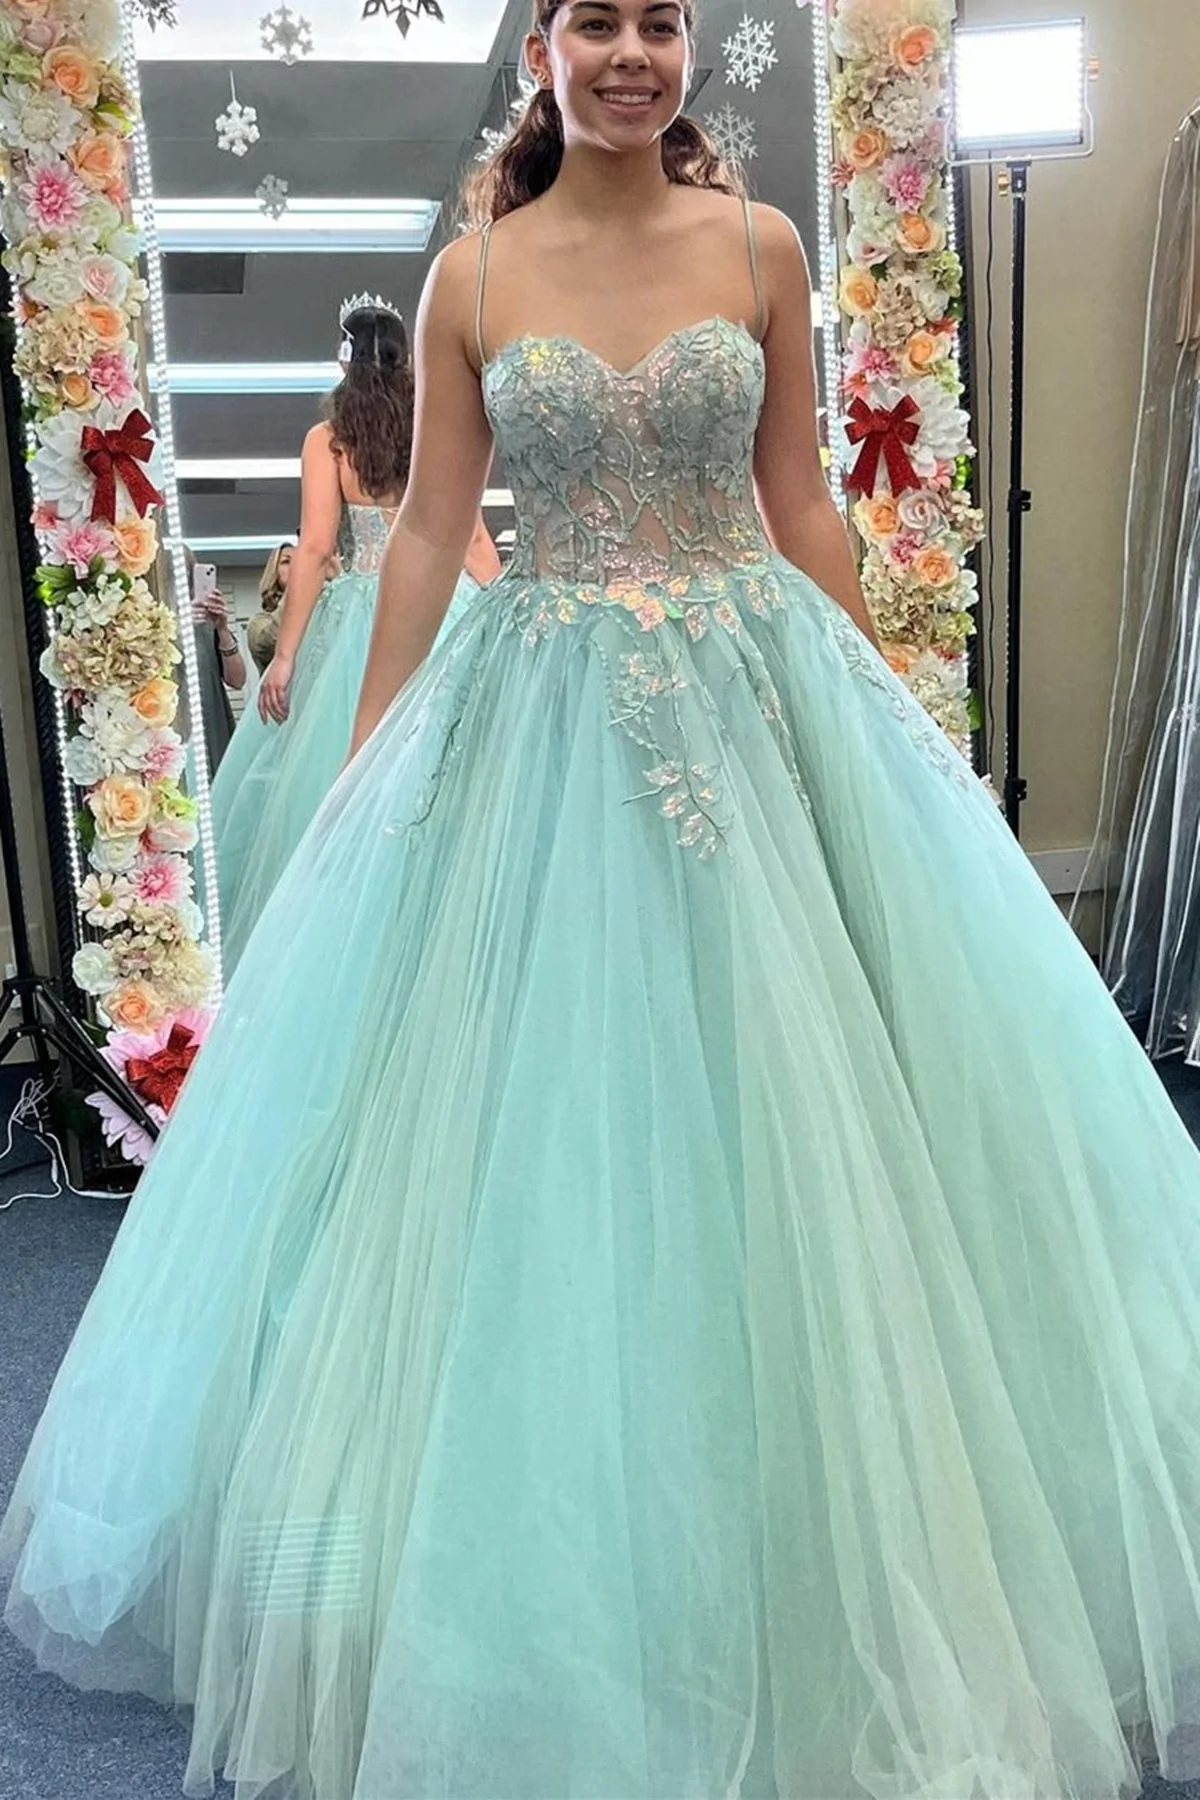 Sweetheart Neck Mint Green Tulle Lace Applique Long Prom Dresses, Mint Green Tulle Lace Floral Formal Evening Dresses, Ball Gown nv432